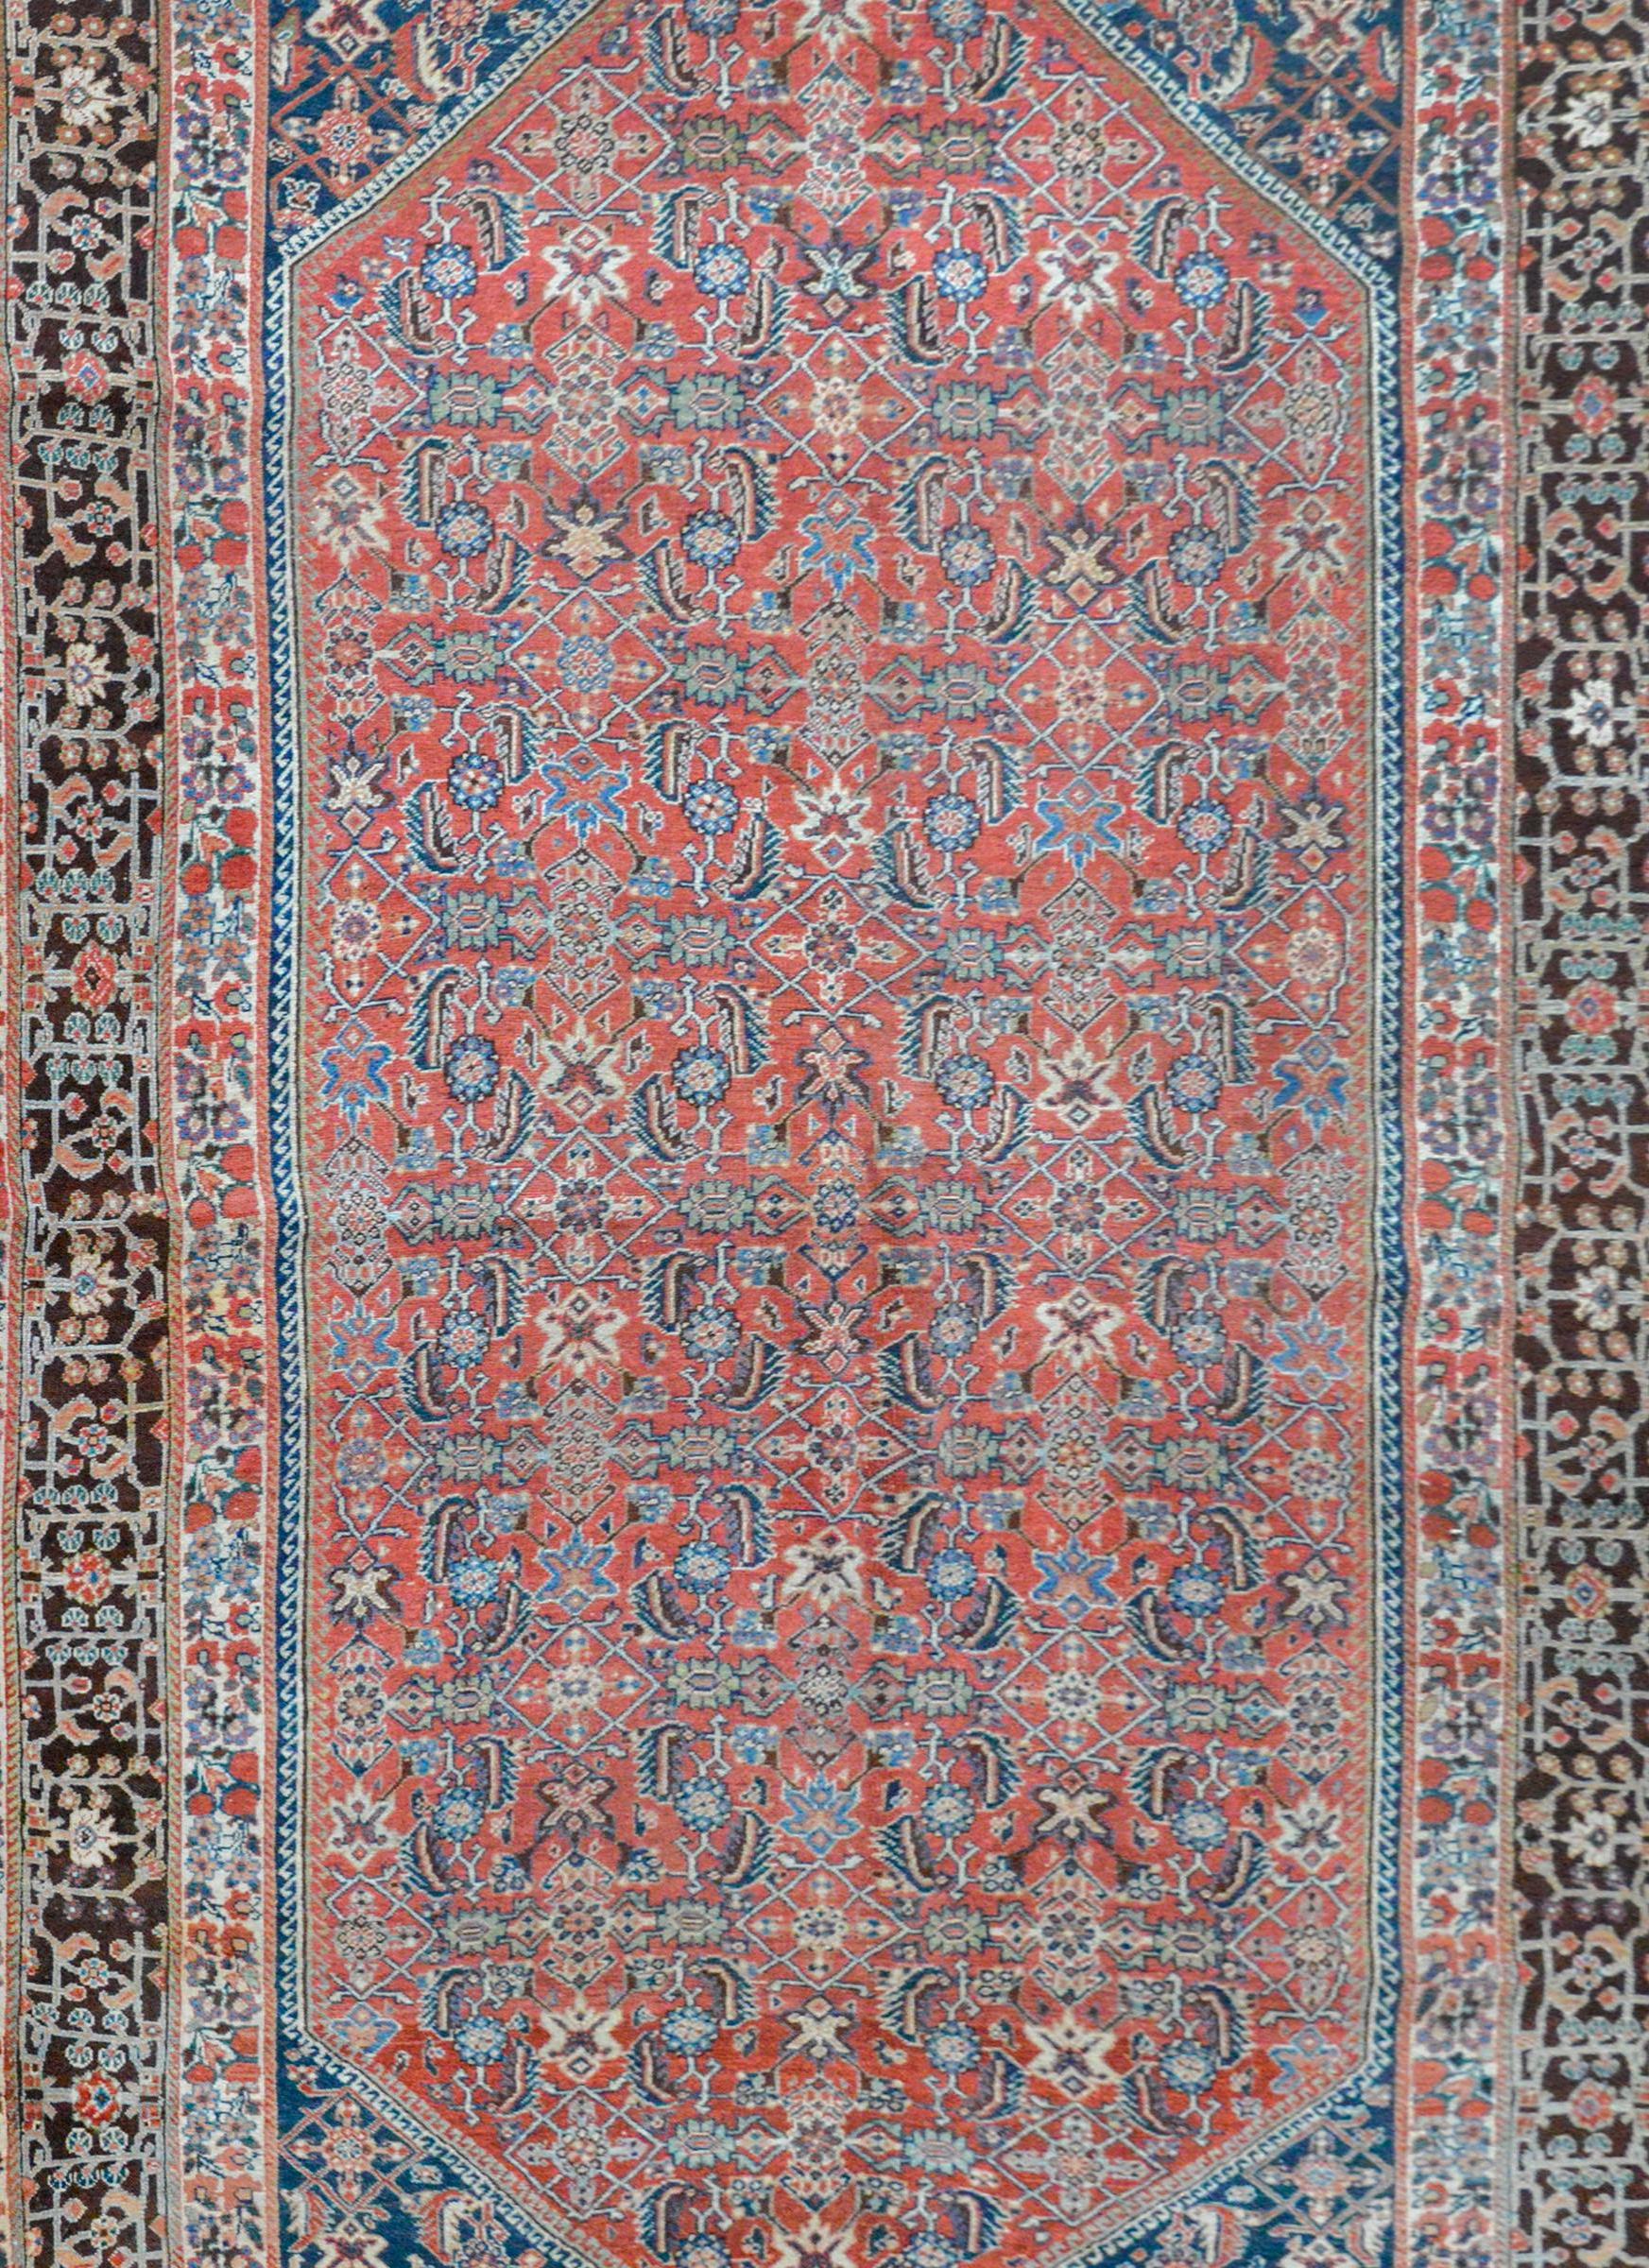 A beautiful early 20th century Persian Gashgaei rug with an all-over floral trellis pattern woven in crimson, light and dark indigo, white, and pale green colored vegetable dyed wool, all against a crimson background. The border is beautiful, with a